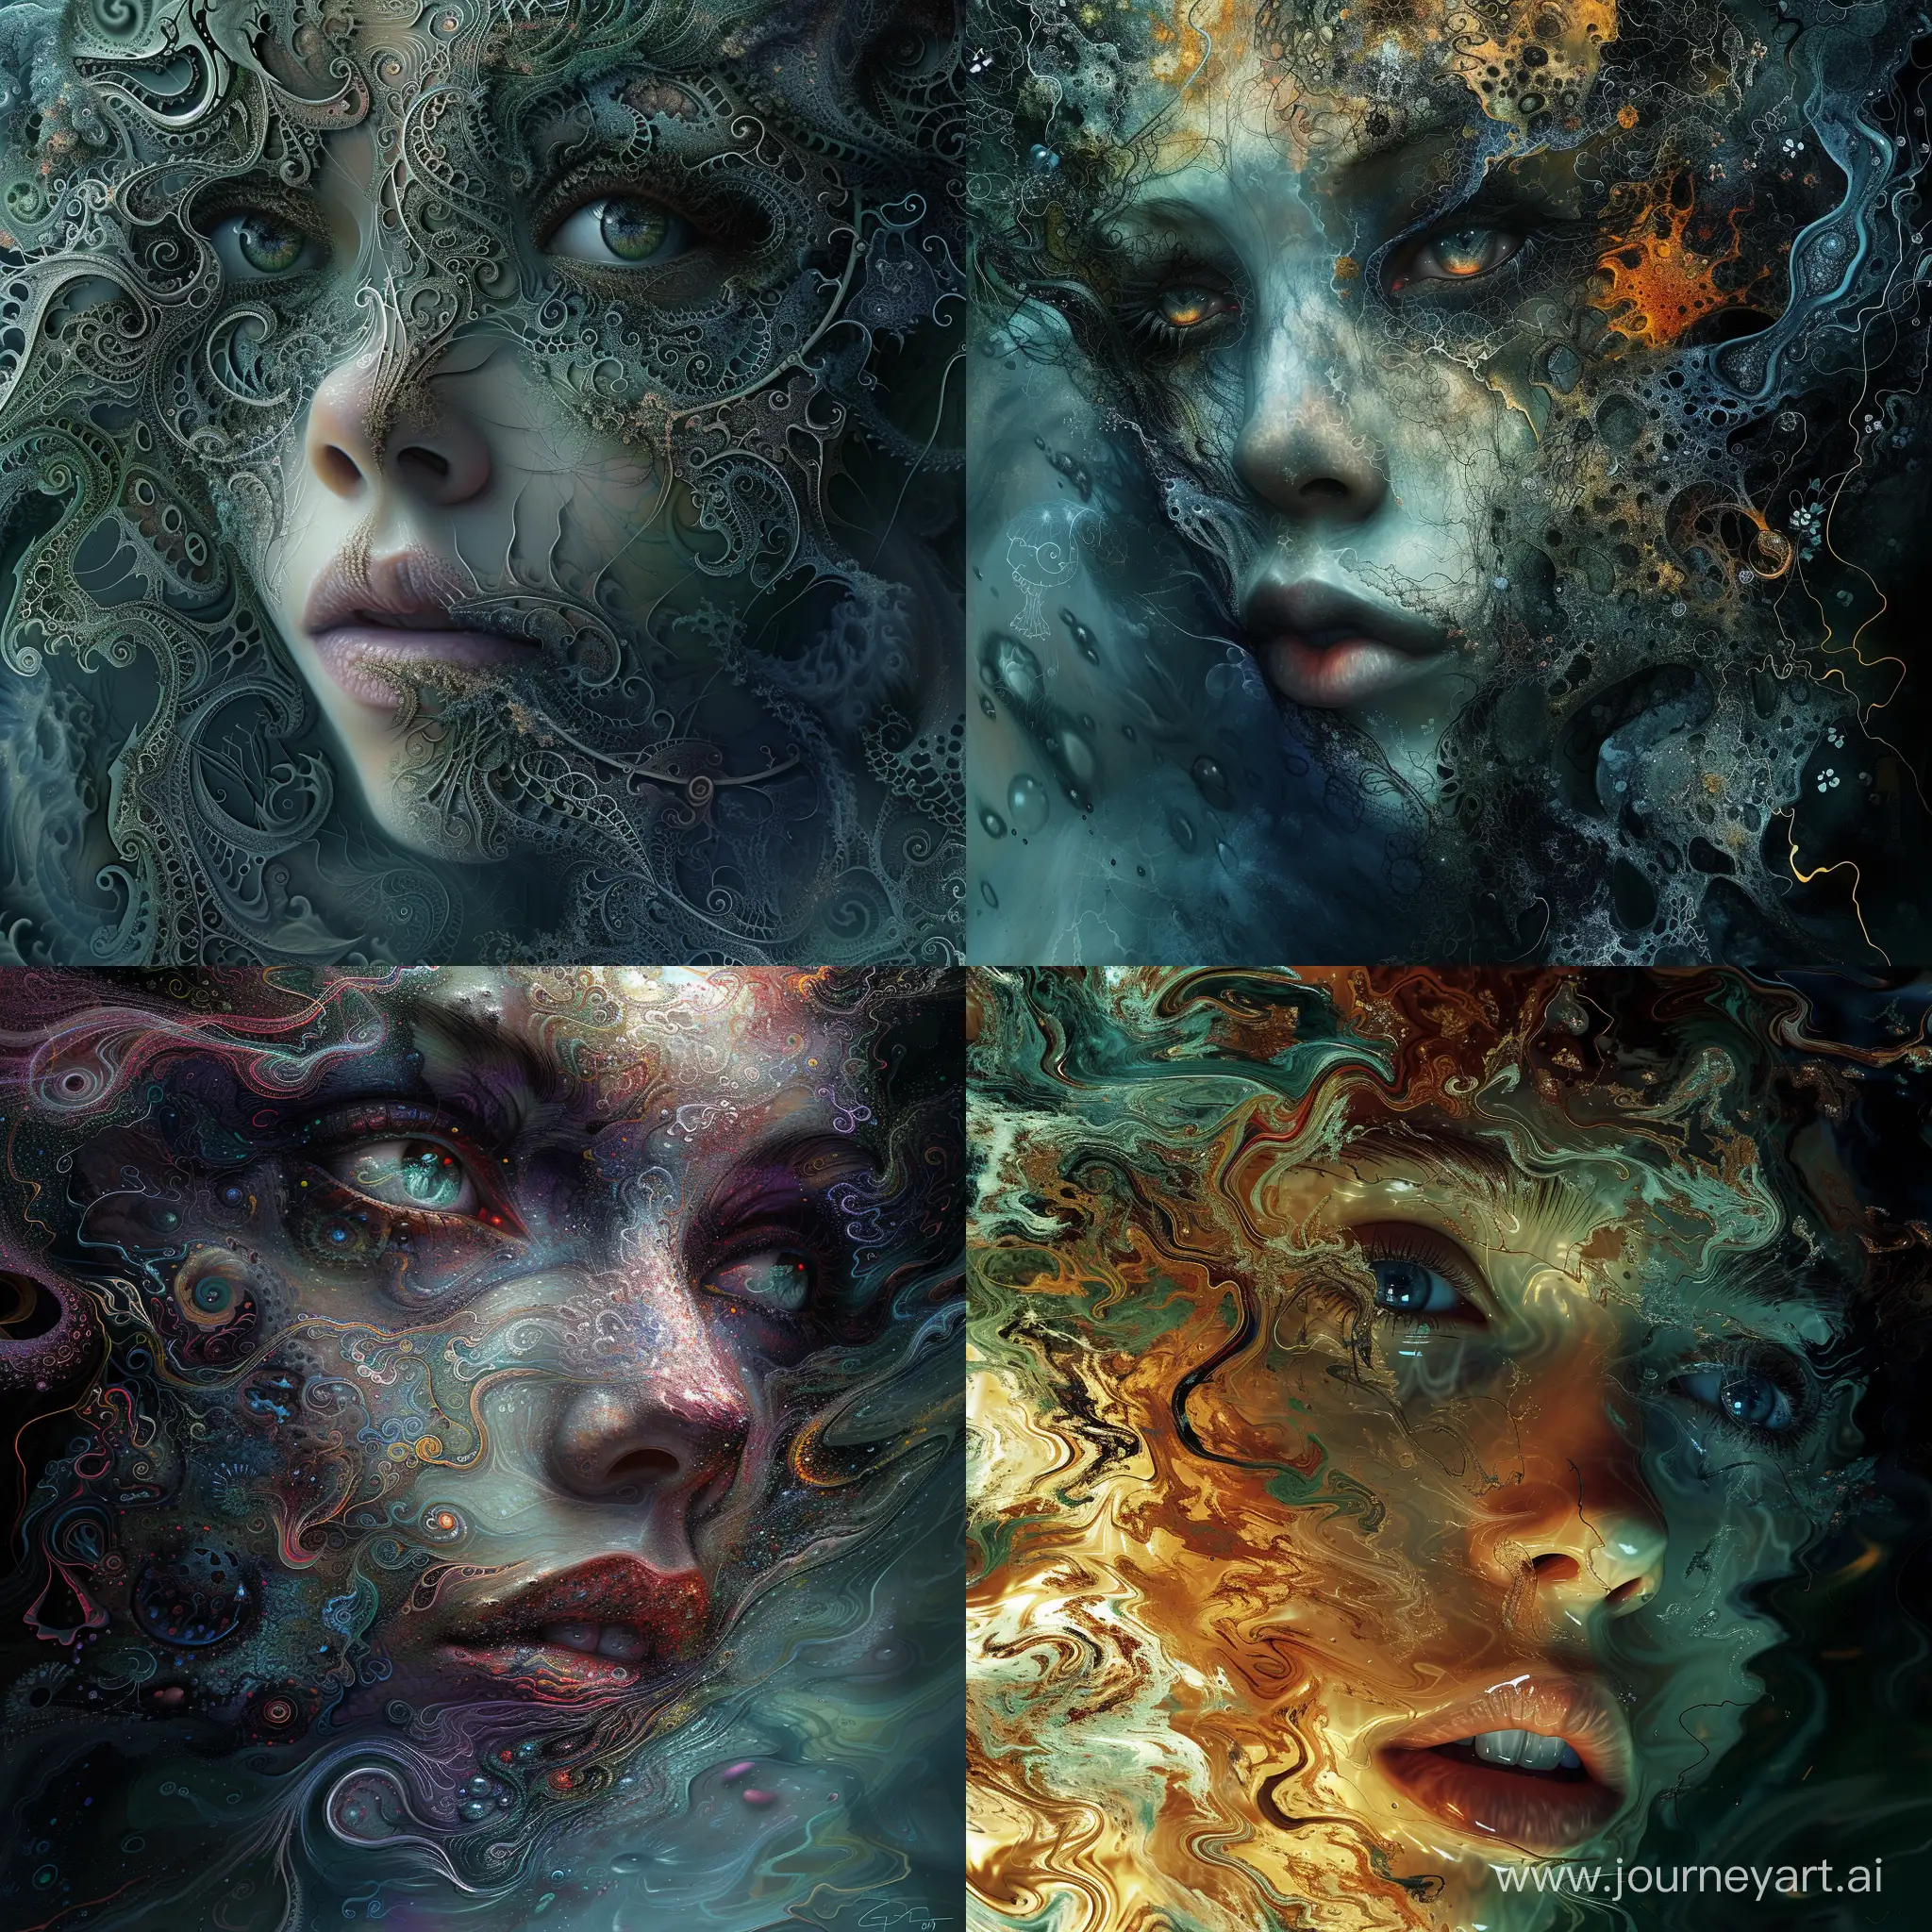 Mysterious-Beauty-Emerges-from-the-Depths-Hauntingly-Detailed-Abstract-Artwork